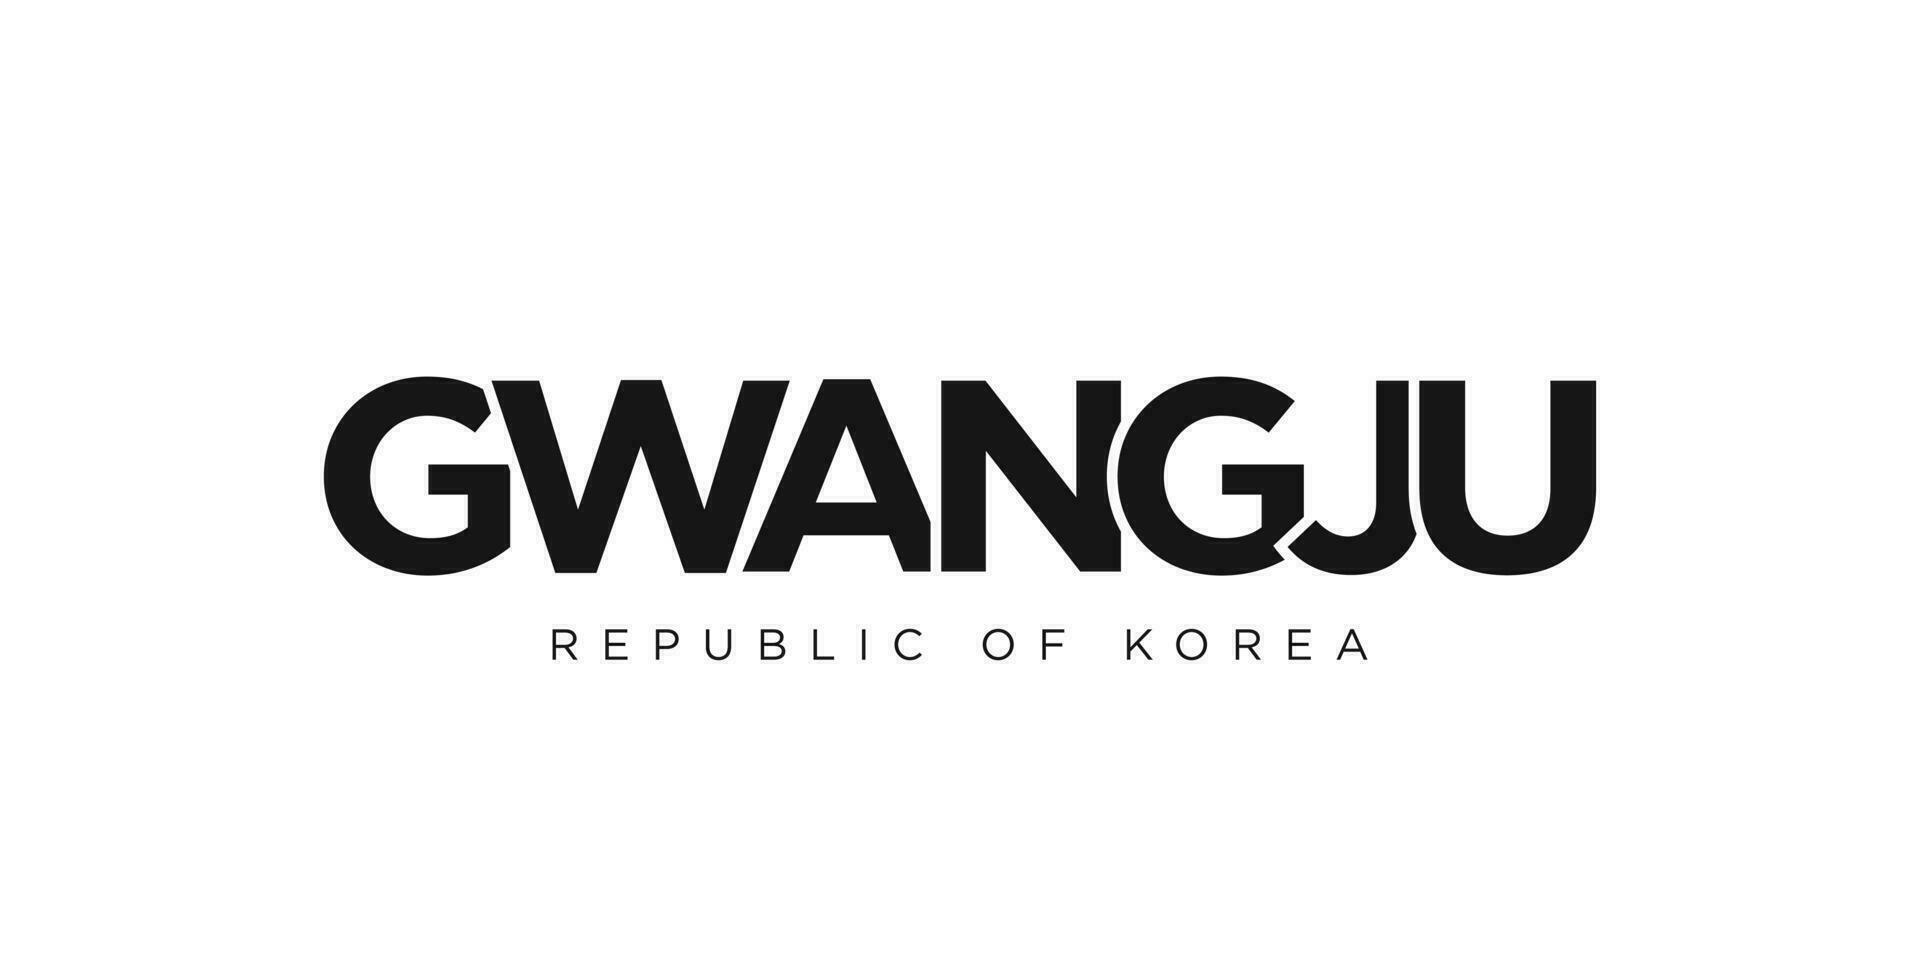 Gwangju in the Korea emblem. The design features a geometric style, vector illustration with bold typography in a modern font. The graphic slogan lettering.